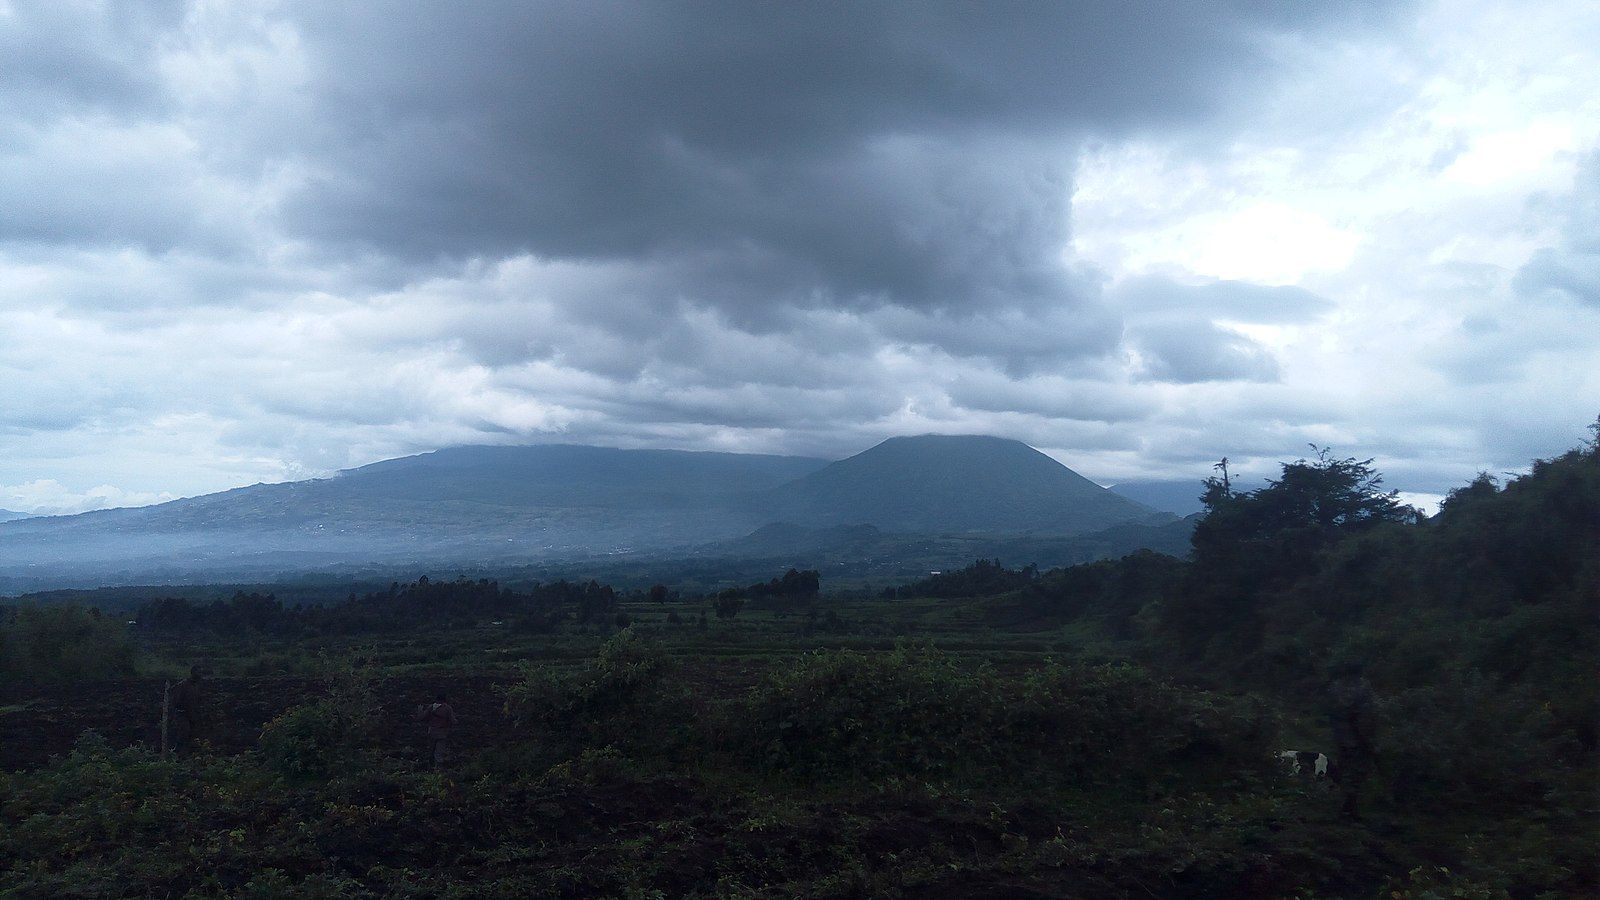 Mount Karisimbi (the flat-topped silhouette on the right), the highest volcano in Rwanda, on a typically cloudy morning. Photo: Wikimedia Commons.